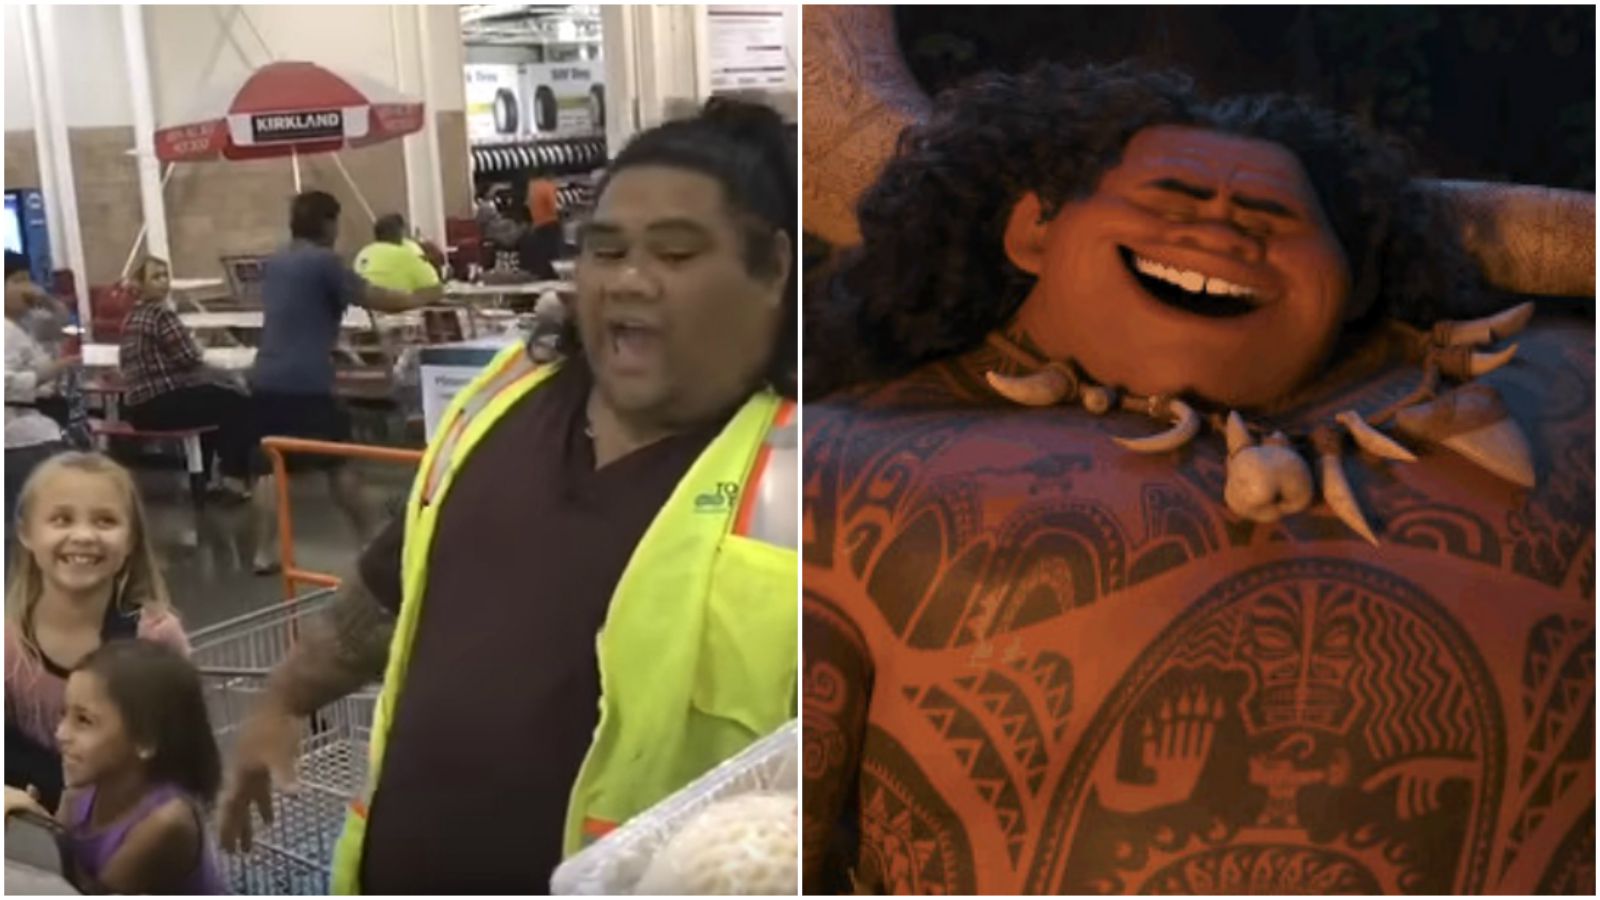 These Young Girls Insist The Costco Clerk Is Maui from Disney’s Moana!